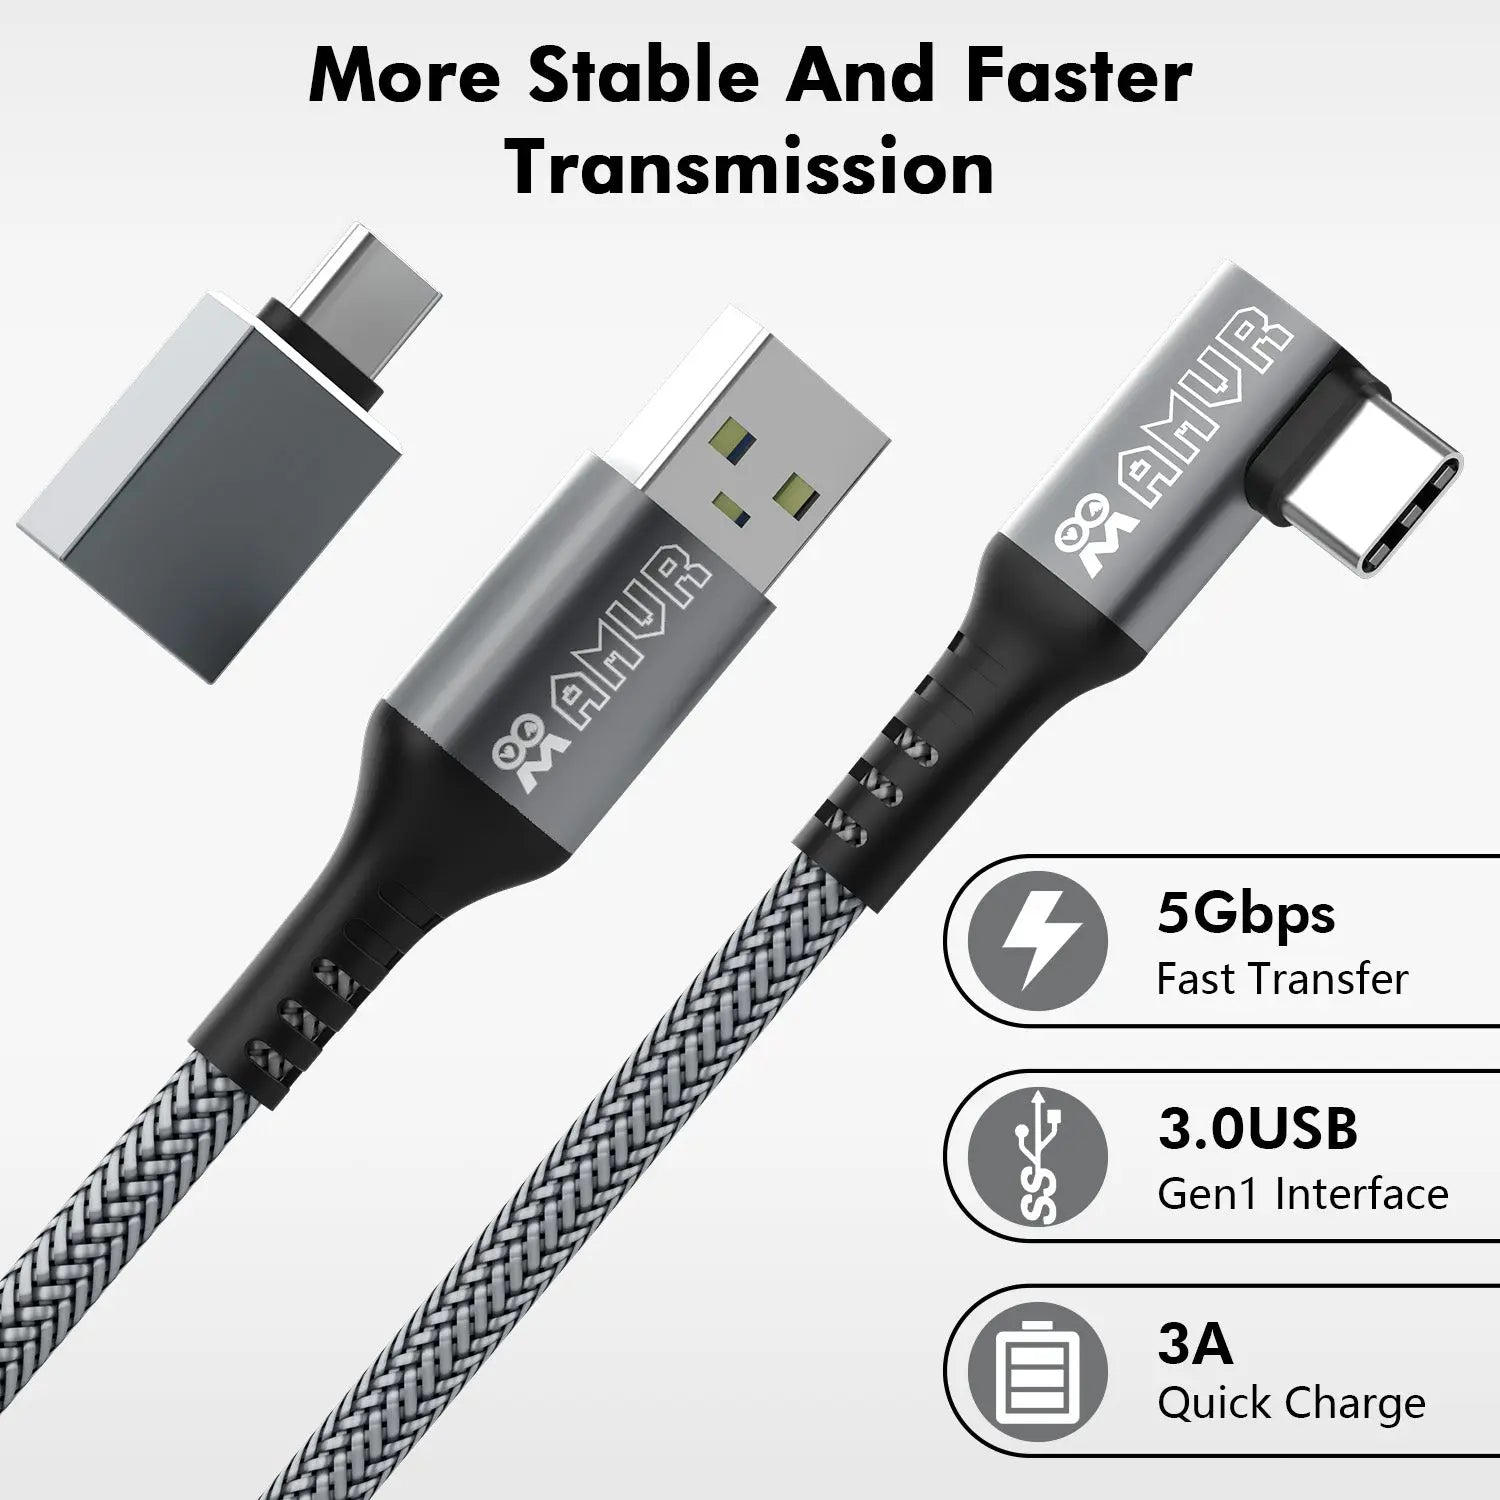 Link Cable 16FT Compatible with Meta/Oculus Quest 3/2 Accessories Charging  While Playing  Play All Day Without Battery Pack USB 3.0 High Speed  Charger Compatible with Quest 3 2 1 Pro Pico 4 